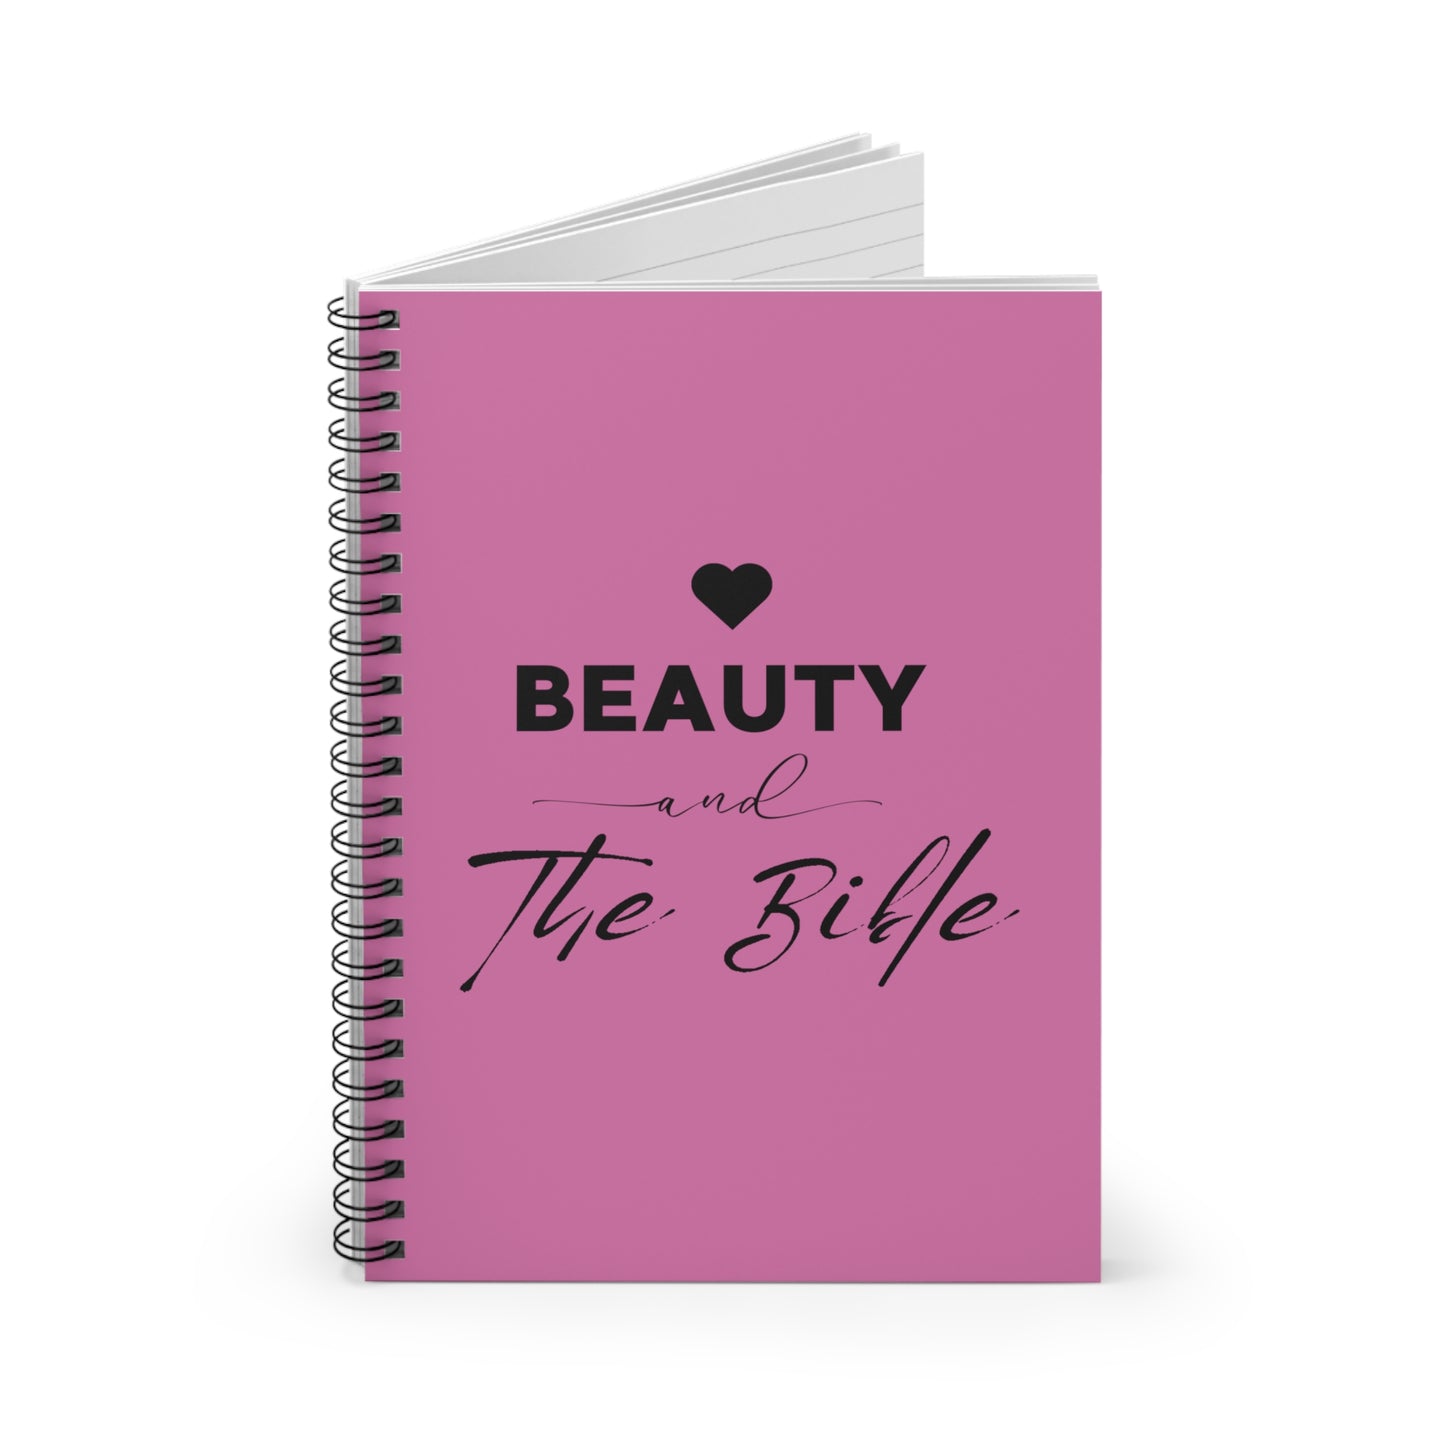 Beauty and the Bible Spiral Notebook - Ruled Line